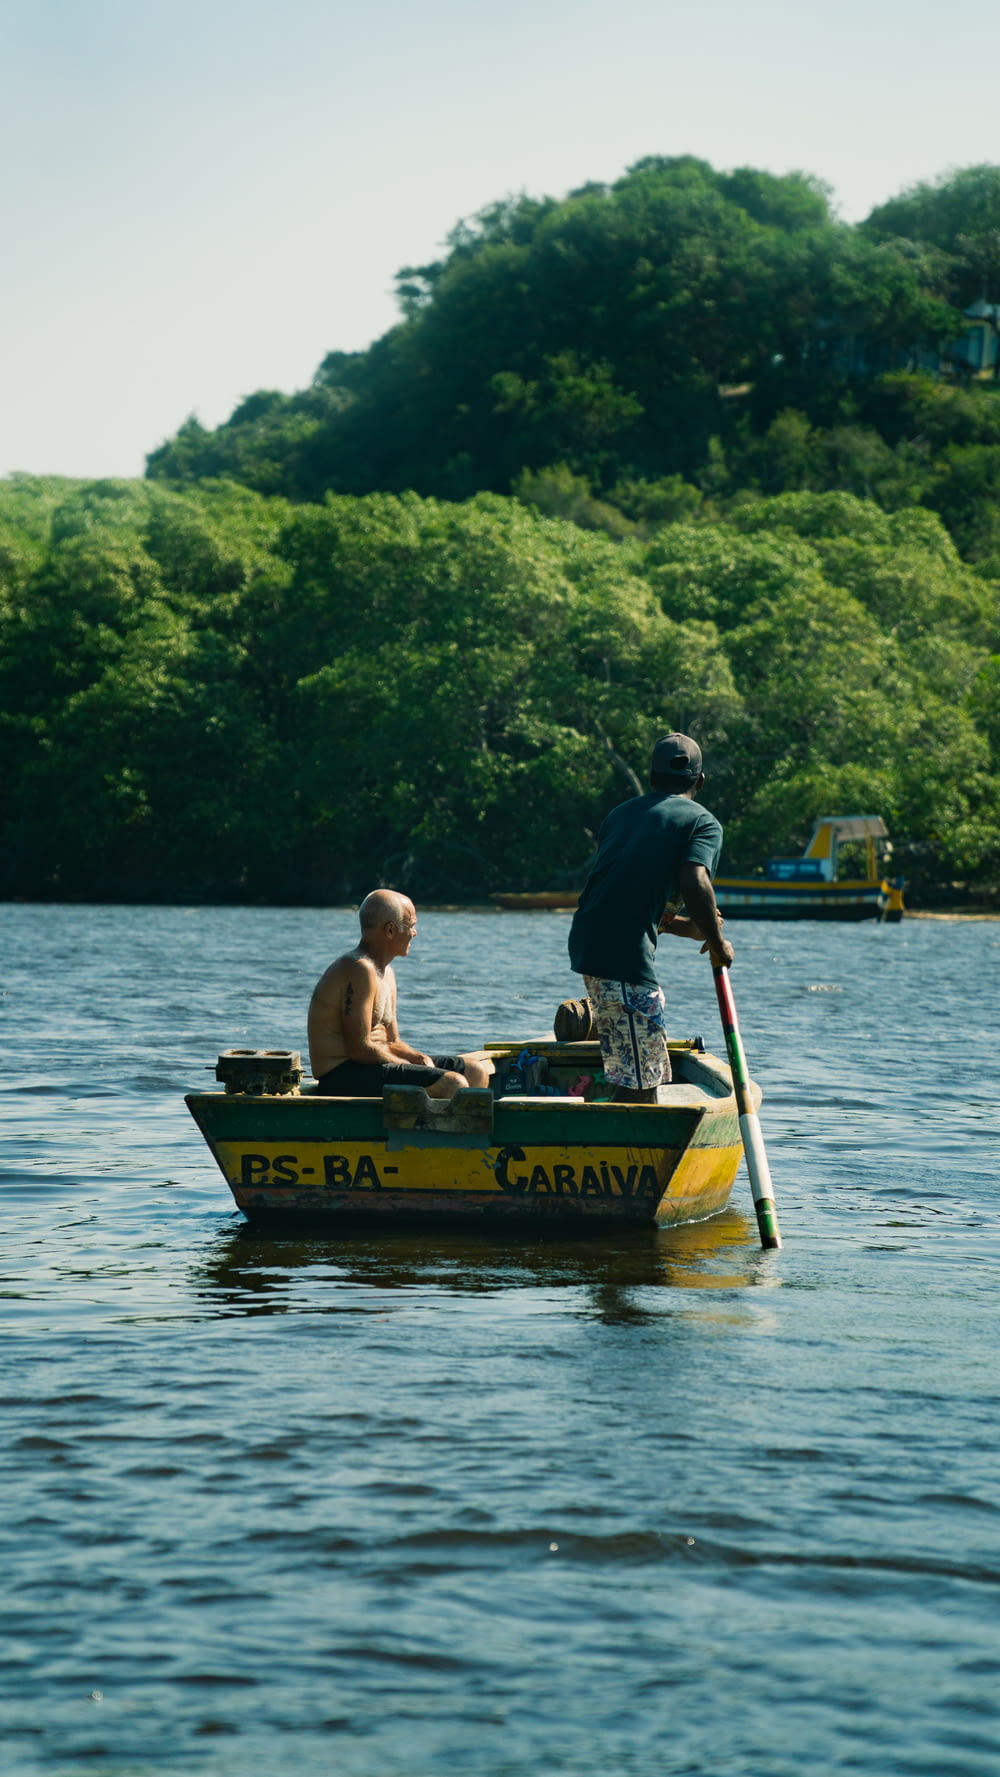 a man and a boy are in a small boat